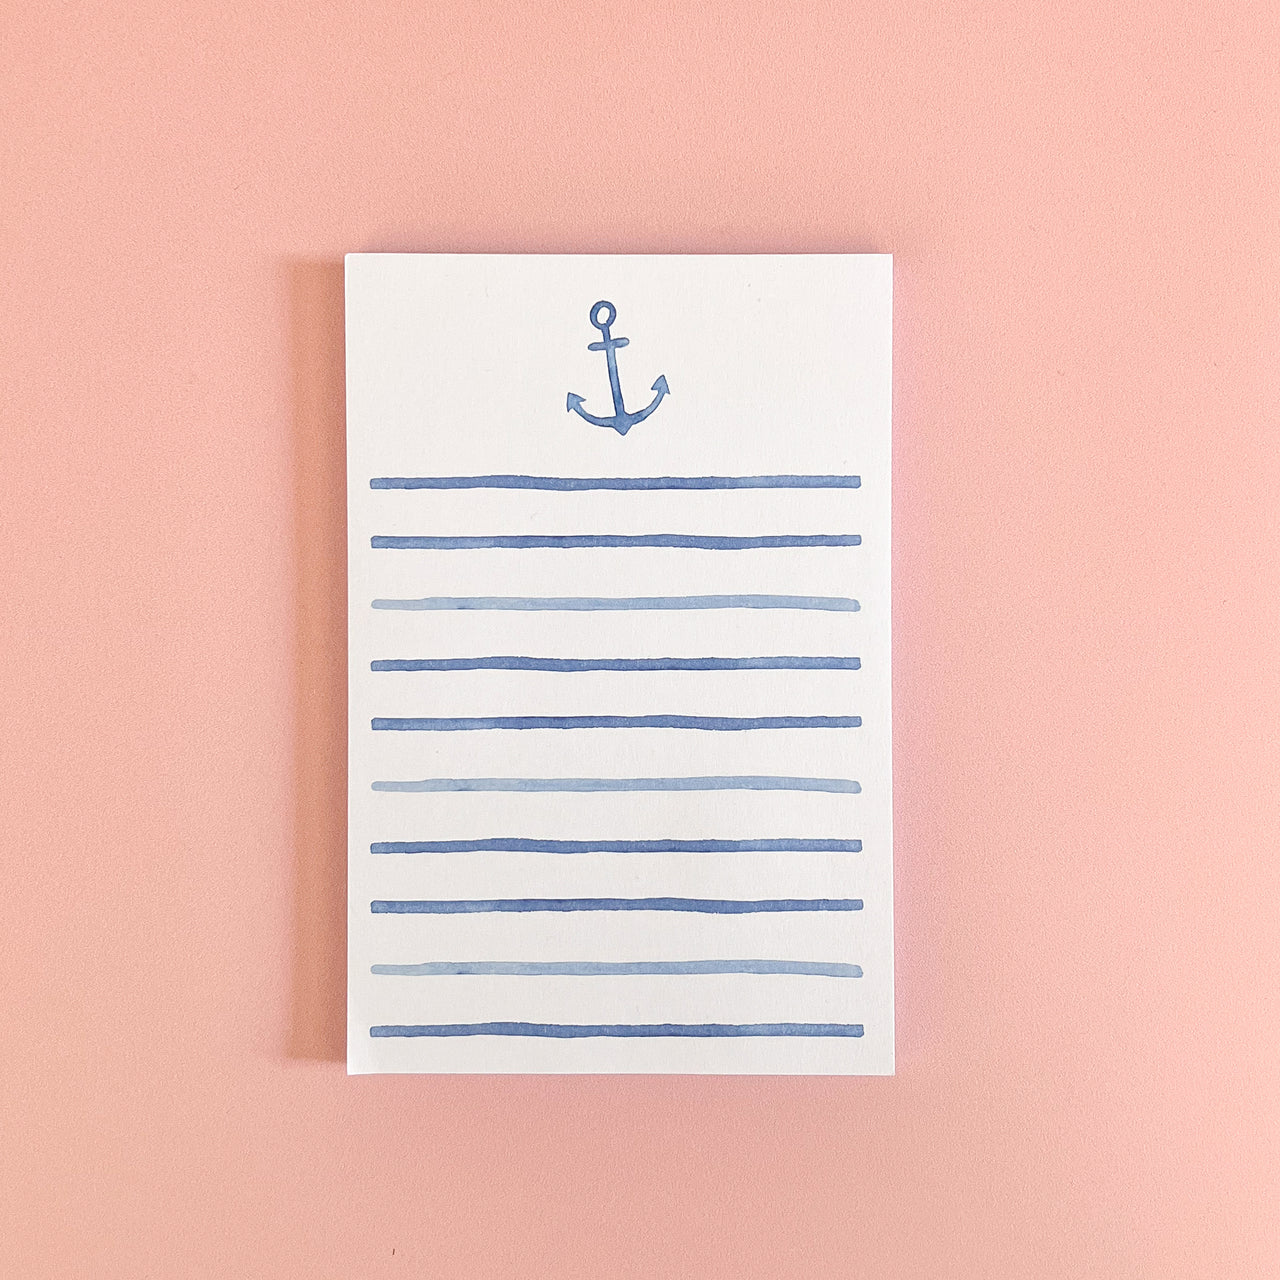 Watercolor Anchor Notepad by Gert & Co